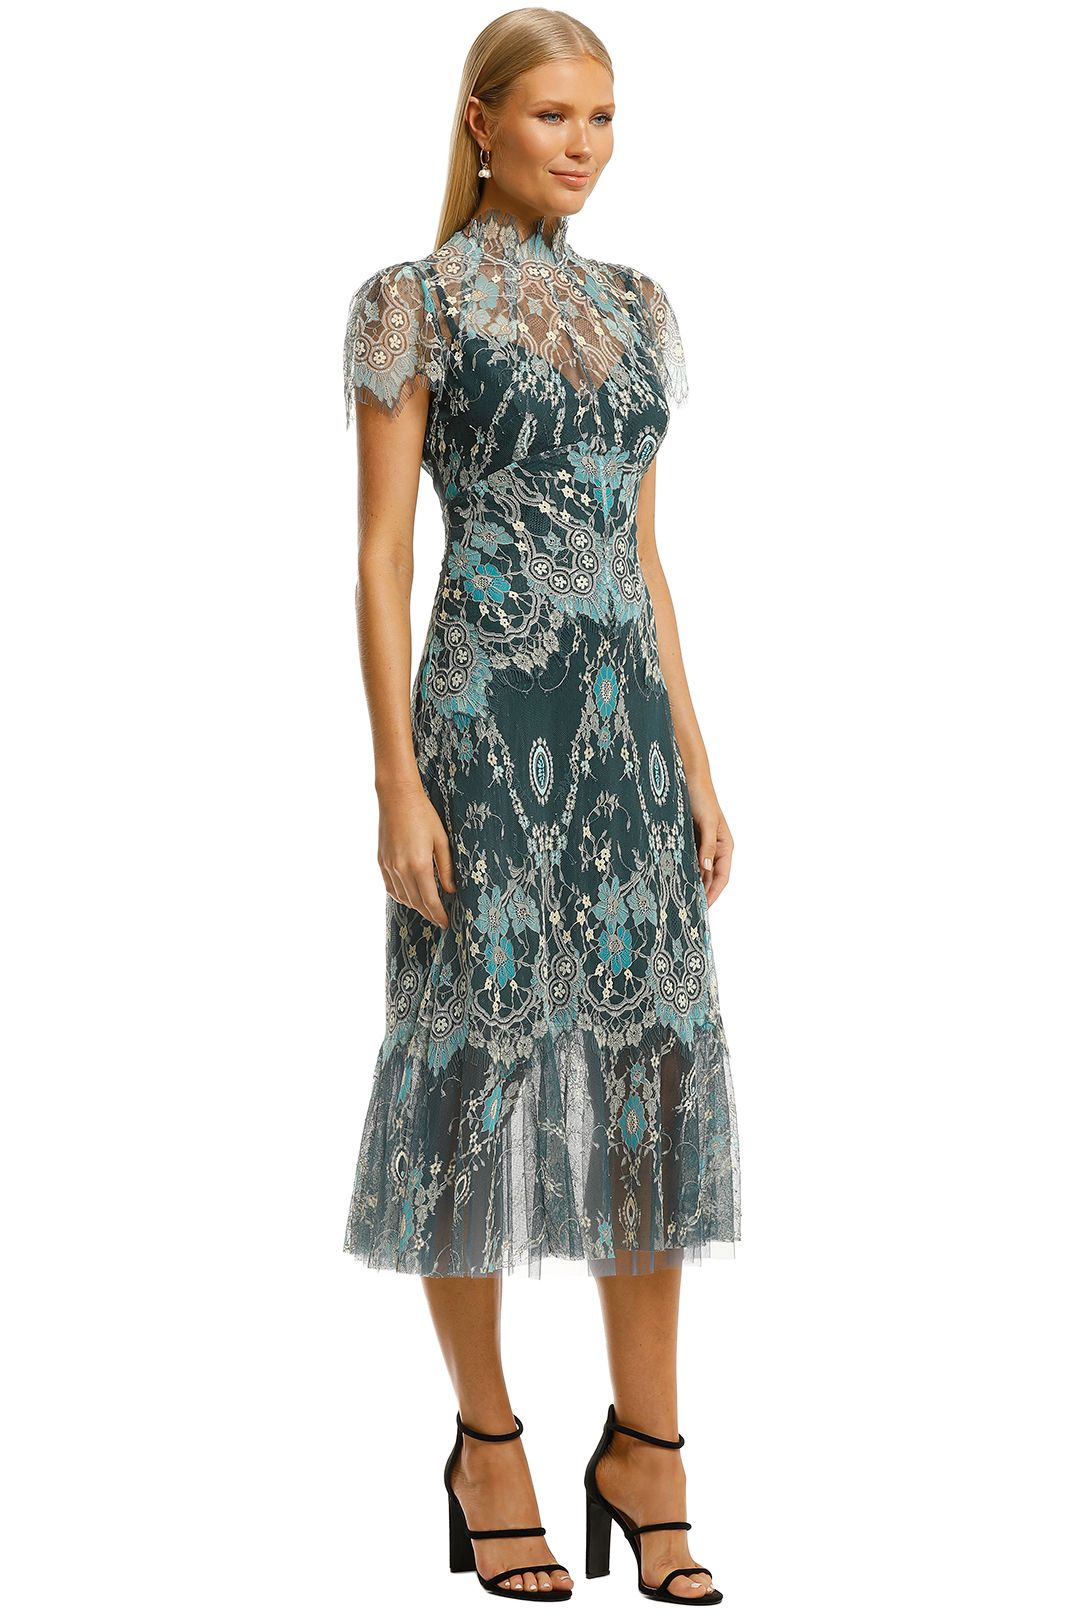 Moss-and-Spy-Cynthia-High-Neck-Dress-Blue-and-Green-Side